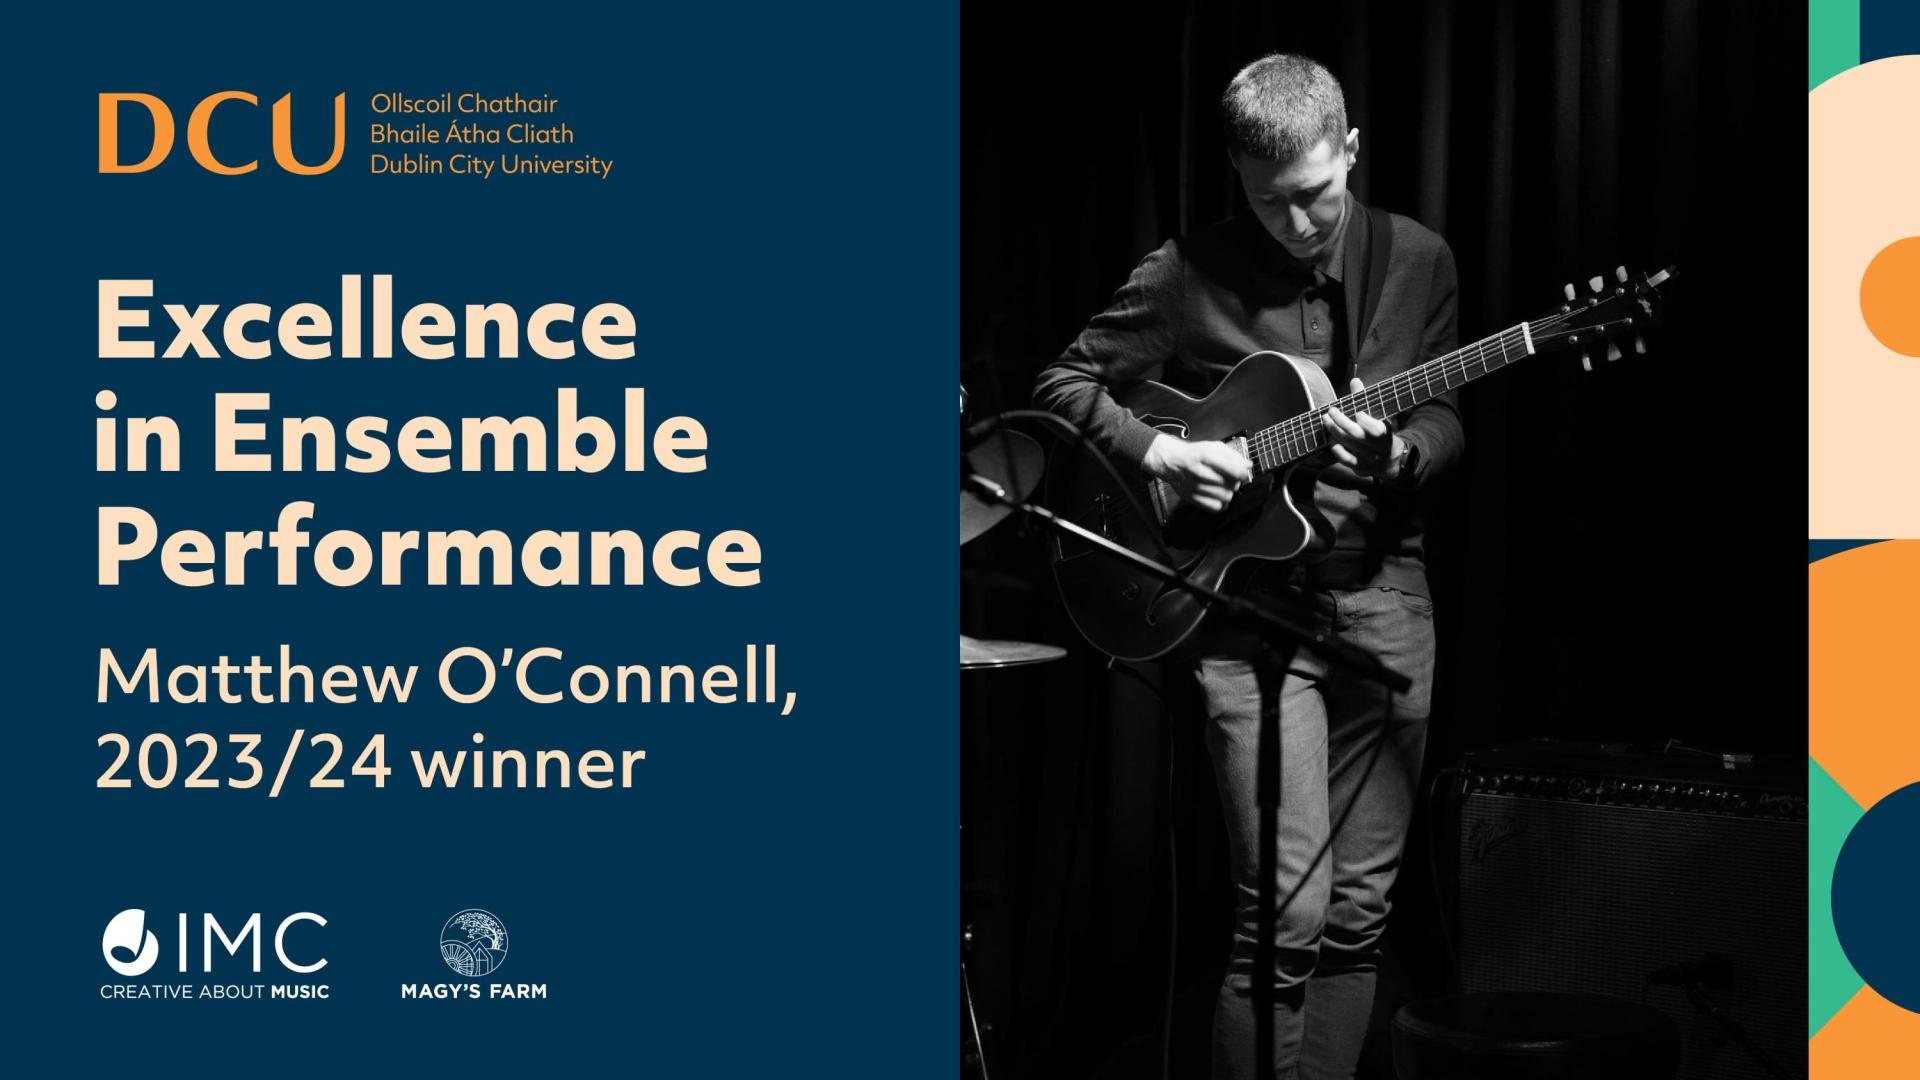 Text reading Excellence in Ensemble Performance, Matthew O'Connell 2023/2024 Winner next to Matthew O'Connell playing guitar on stage 